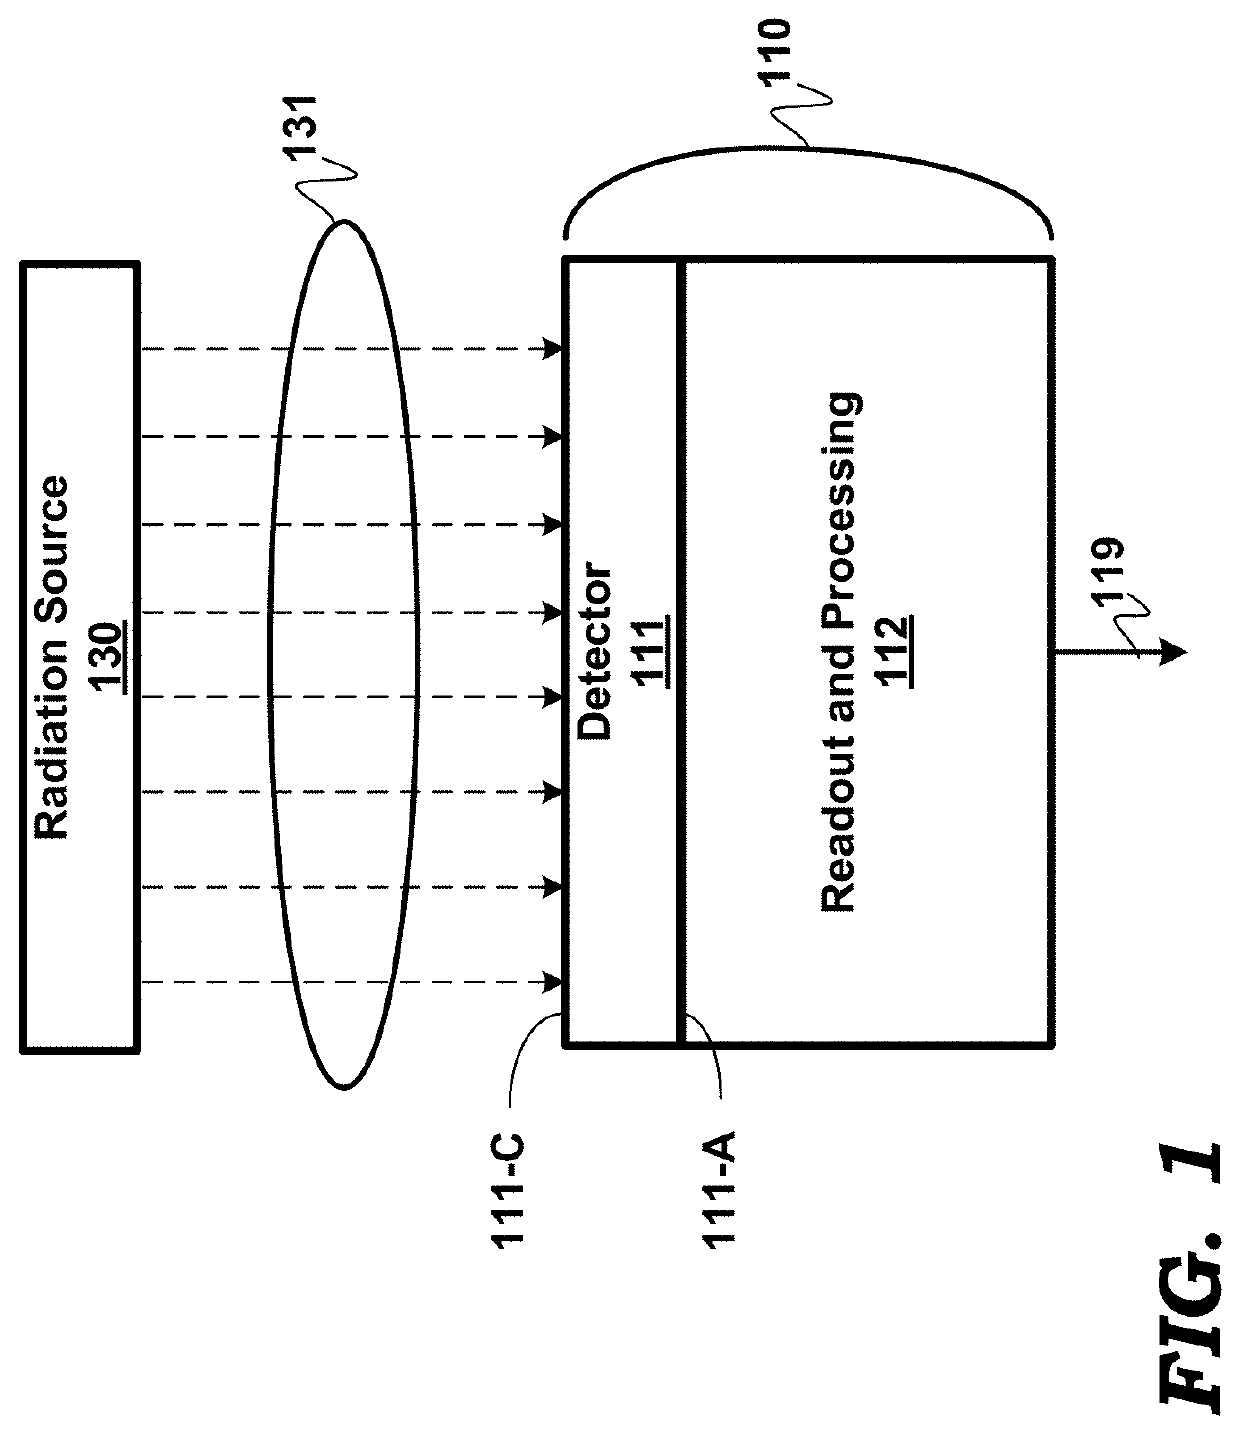 Readout and processing arrangement in a sensor system